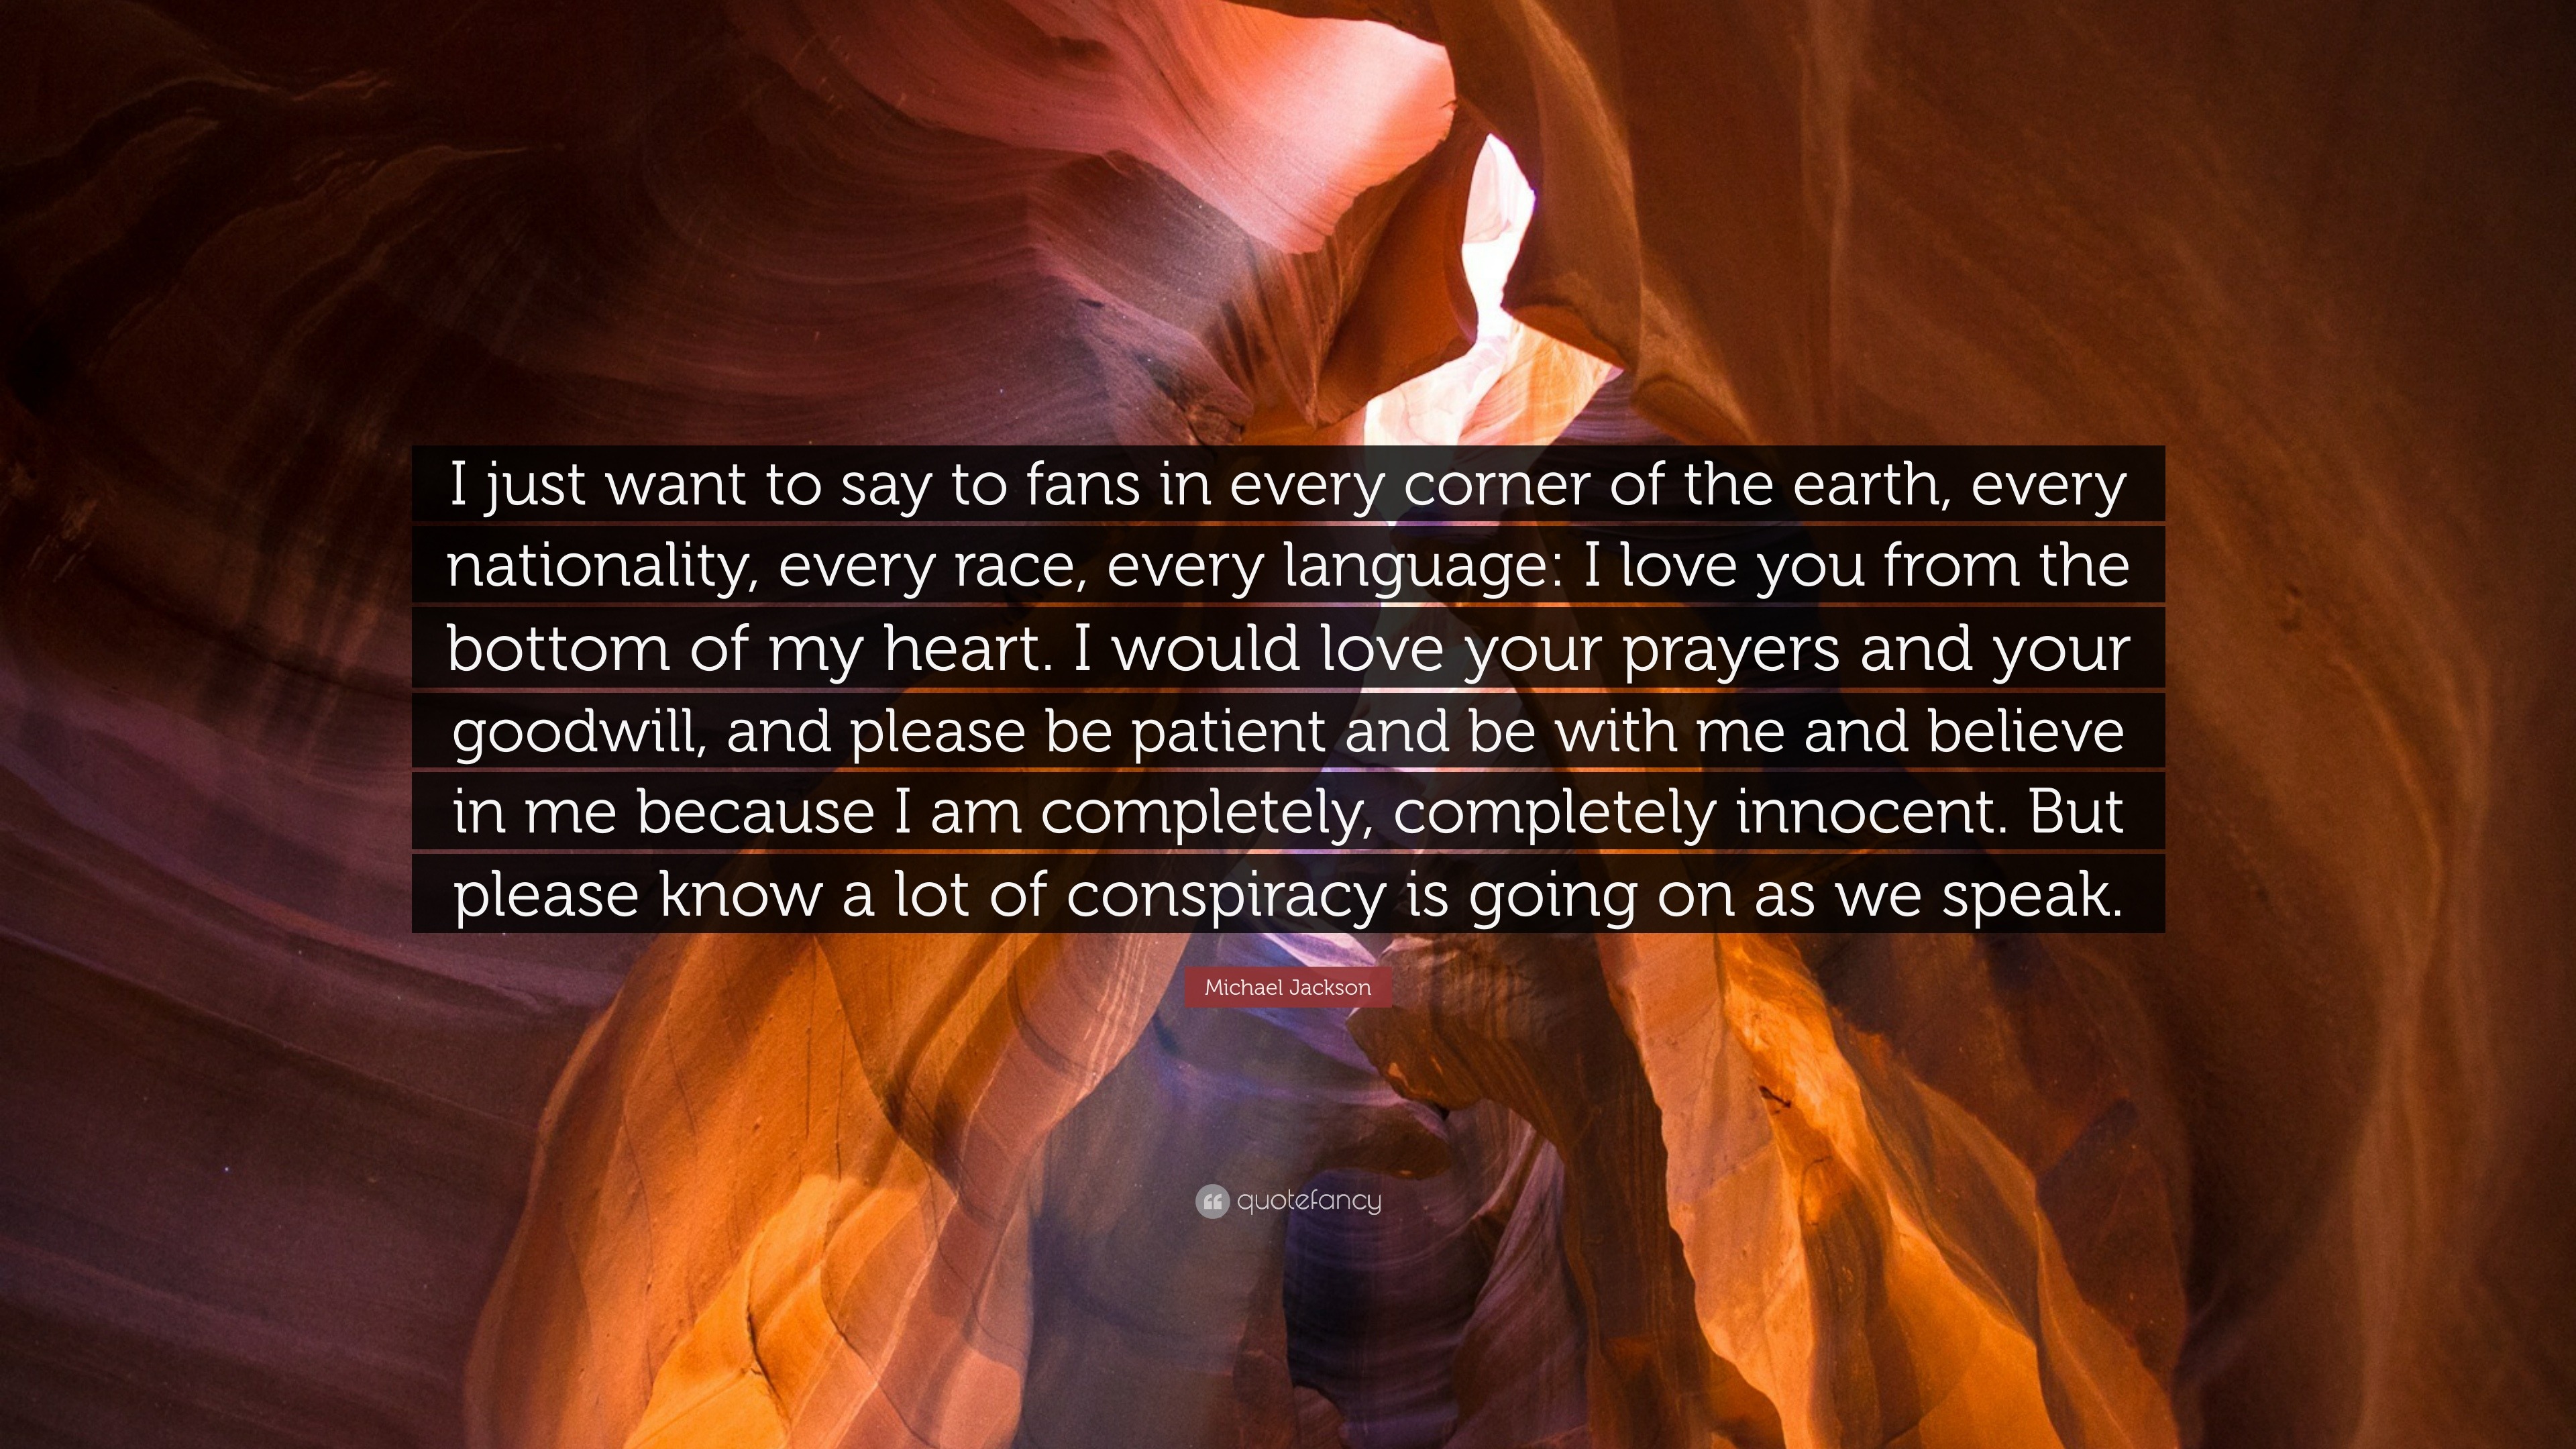 Michael Jackson Quote: “I just want to say to fans in ...